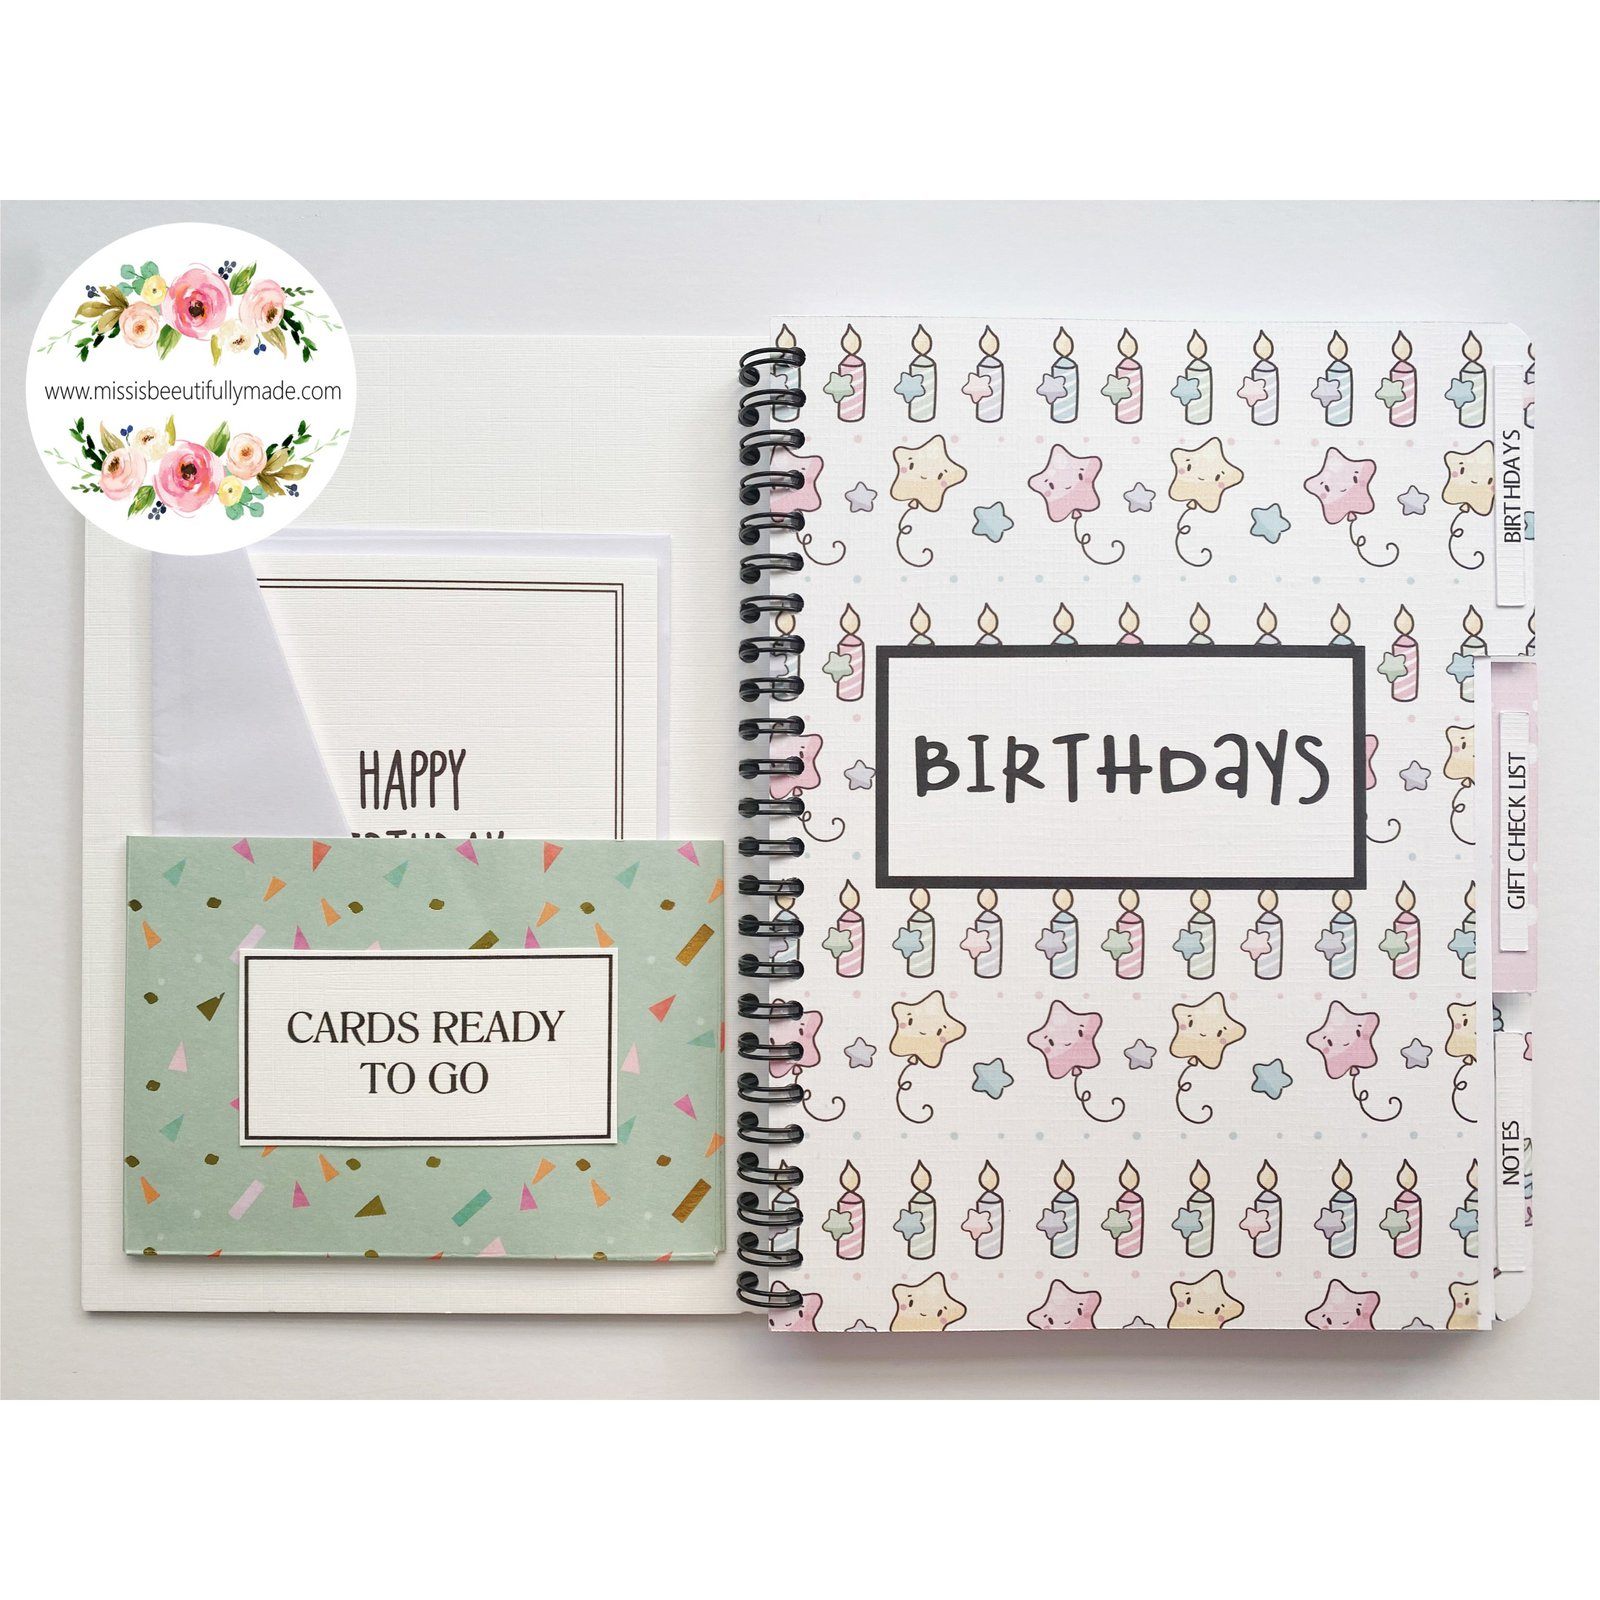 Handmade birthday planner book, high quality papers & embellishments. Cute kawaii design, light pastel rainbow colours and gold glitters. Contains pages for keeping track of upcoming birthdays, gift tracker pages, a folder for storing cards.